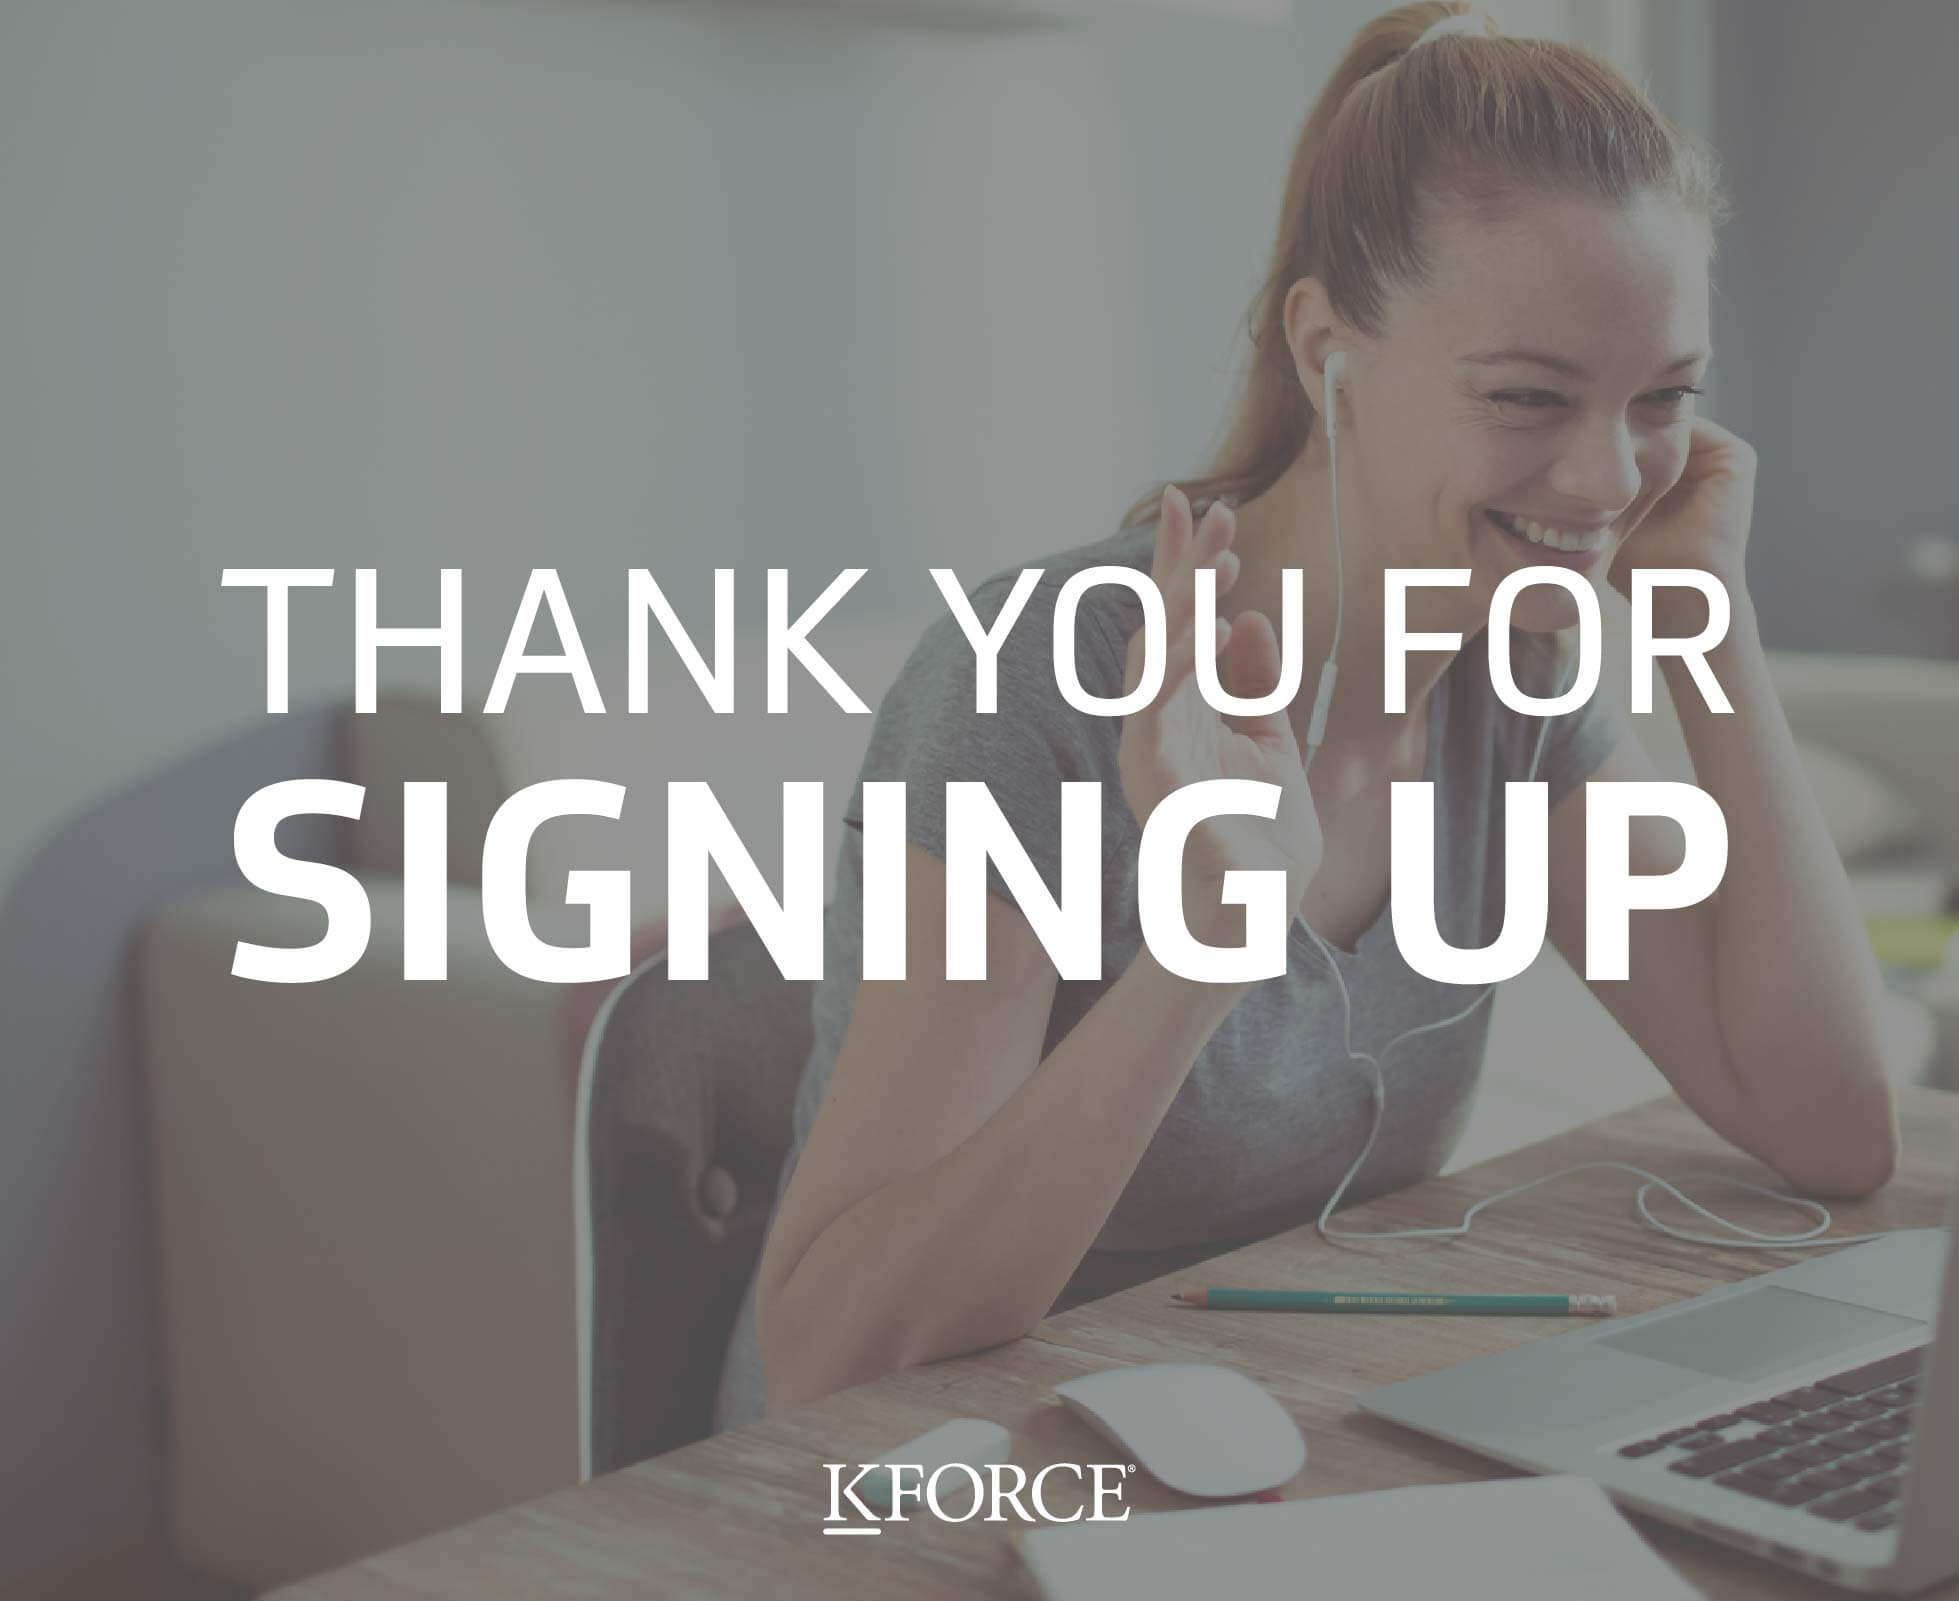 Thank you for signing up